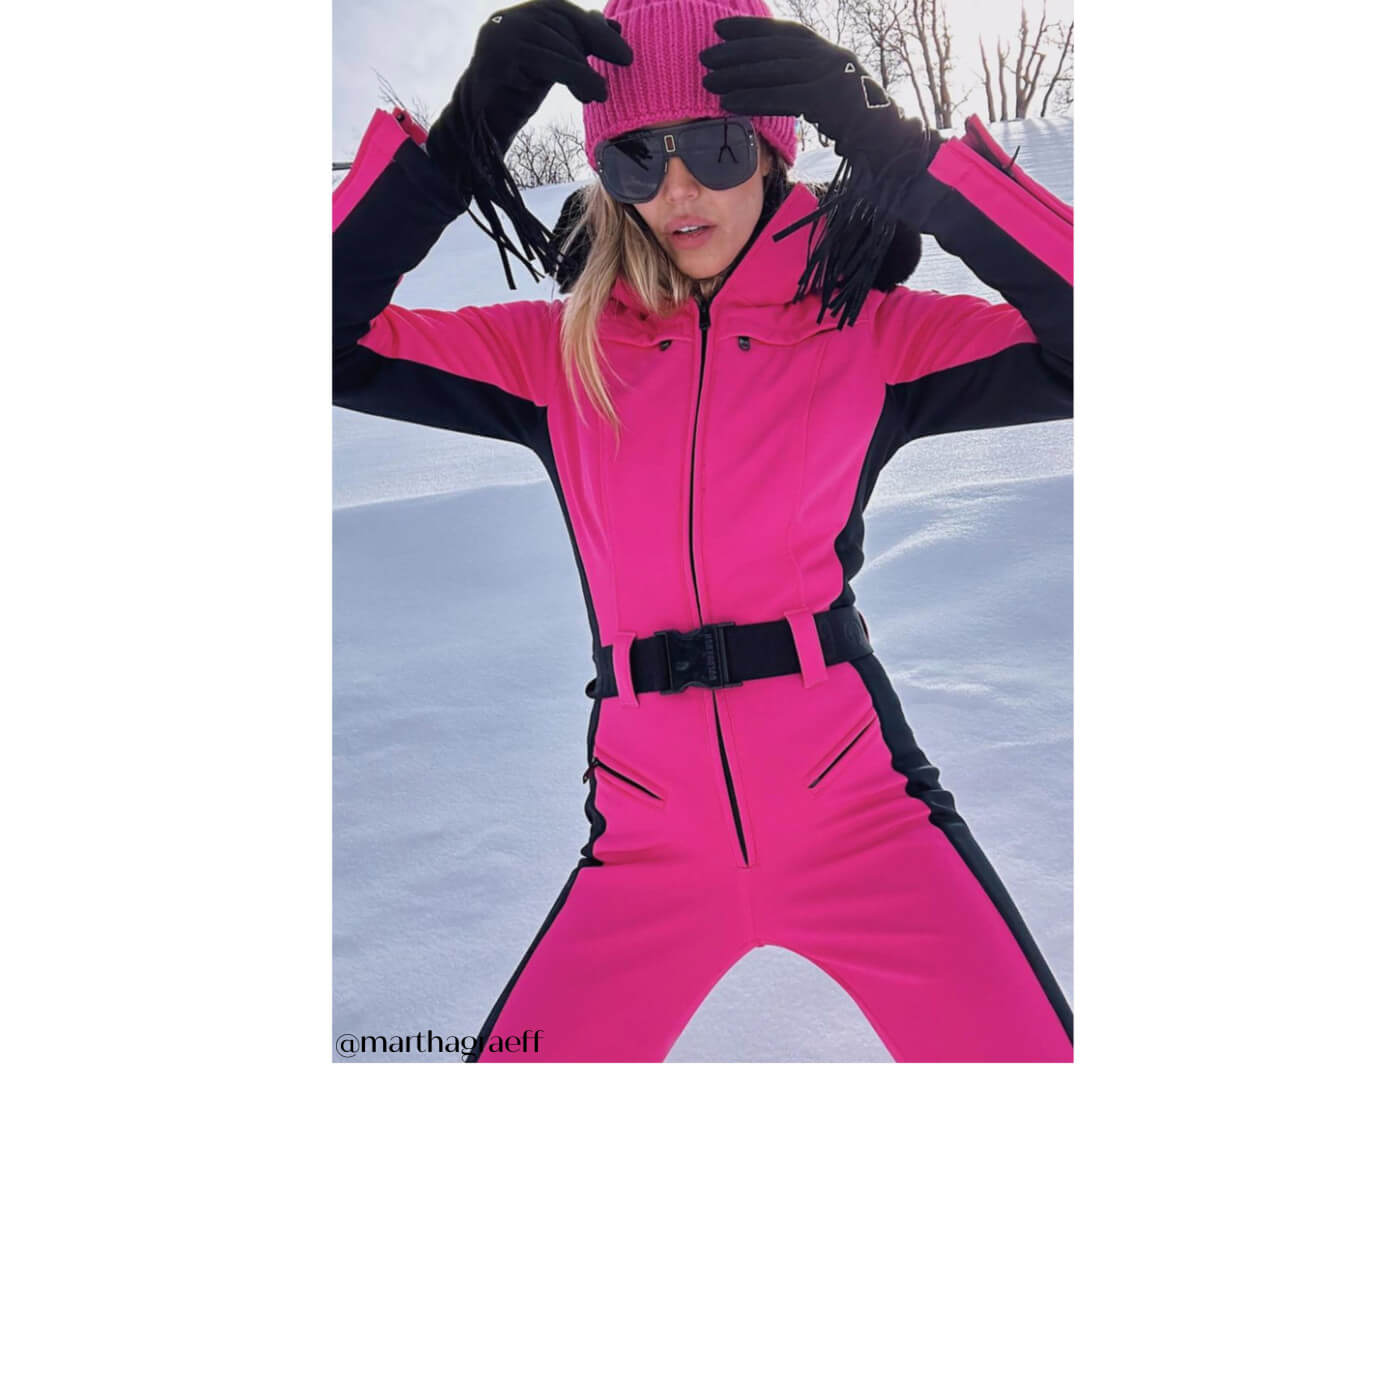 Goldbergh Parry ski suit in Pink Valentine's Day Gift Guide for Skiers 2023